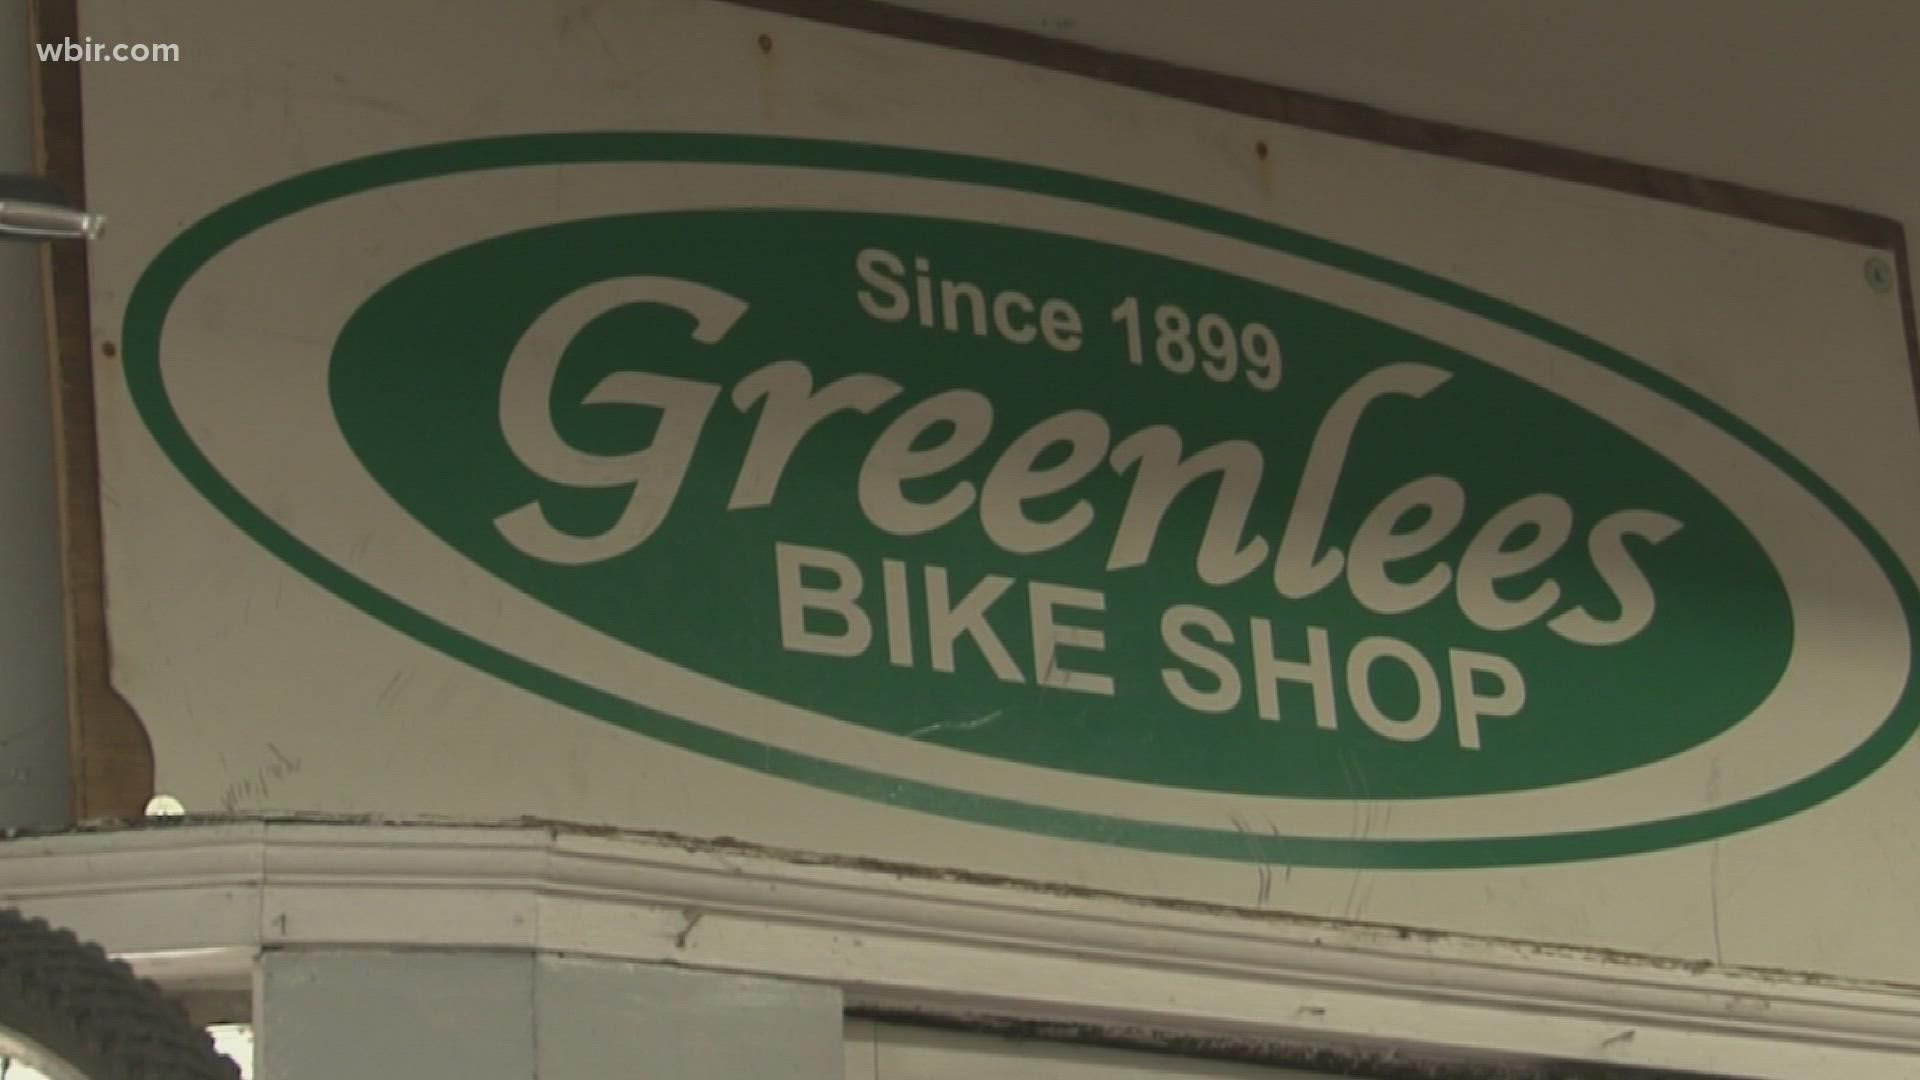 Greenlee is the second-oldest bike shop in the United States, dating back to 1899.